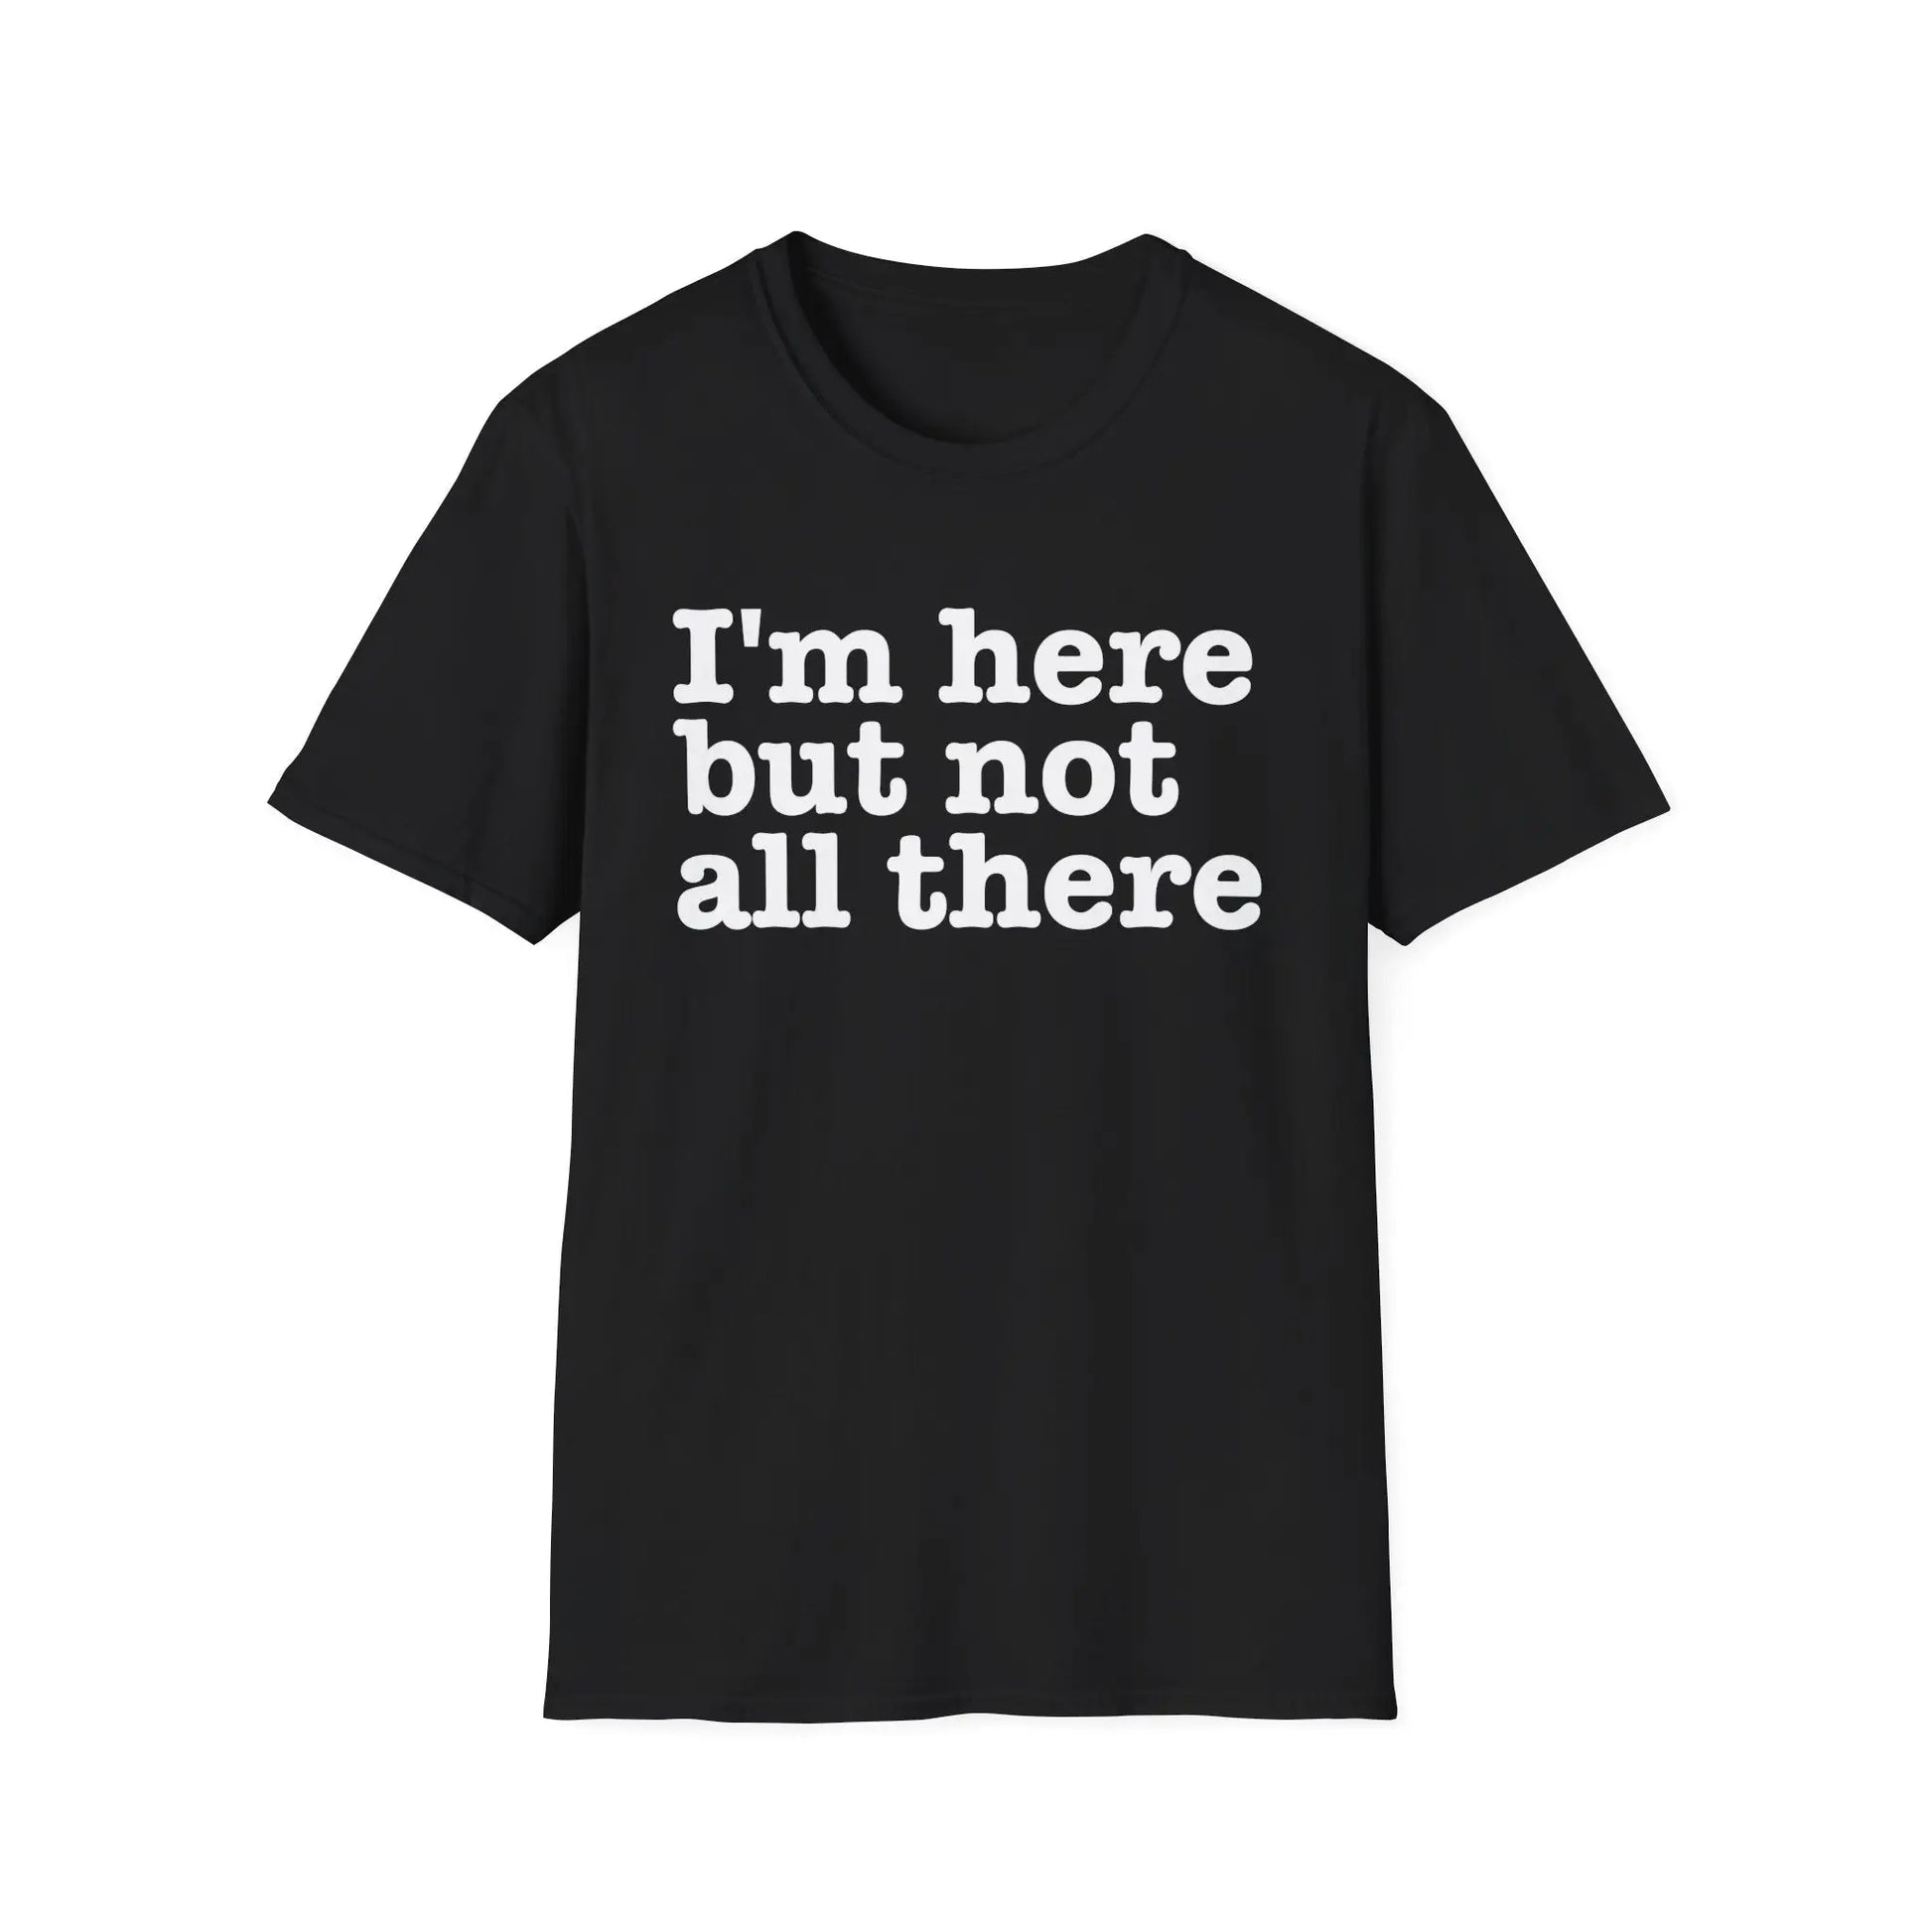 I'm Here But Not All There Women's Softstyle T-Shirt - Wicked Tees